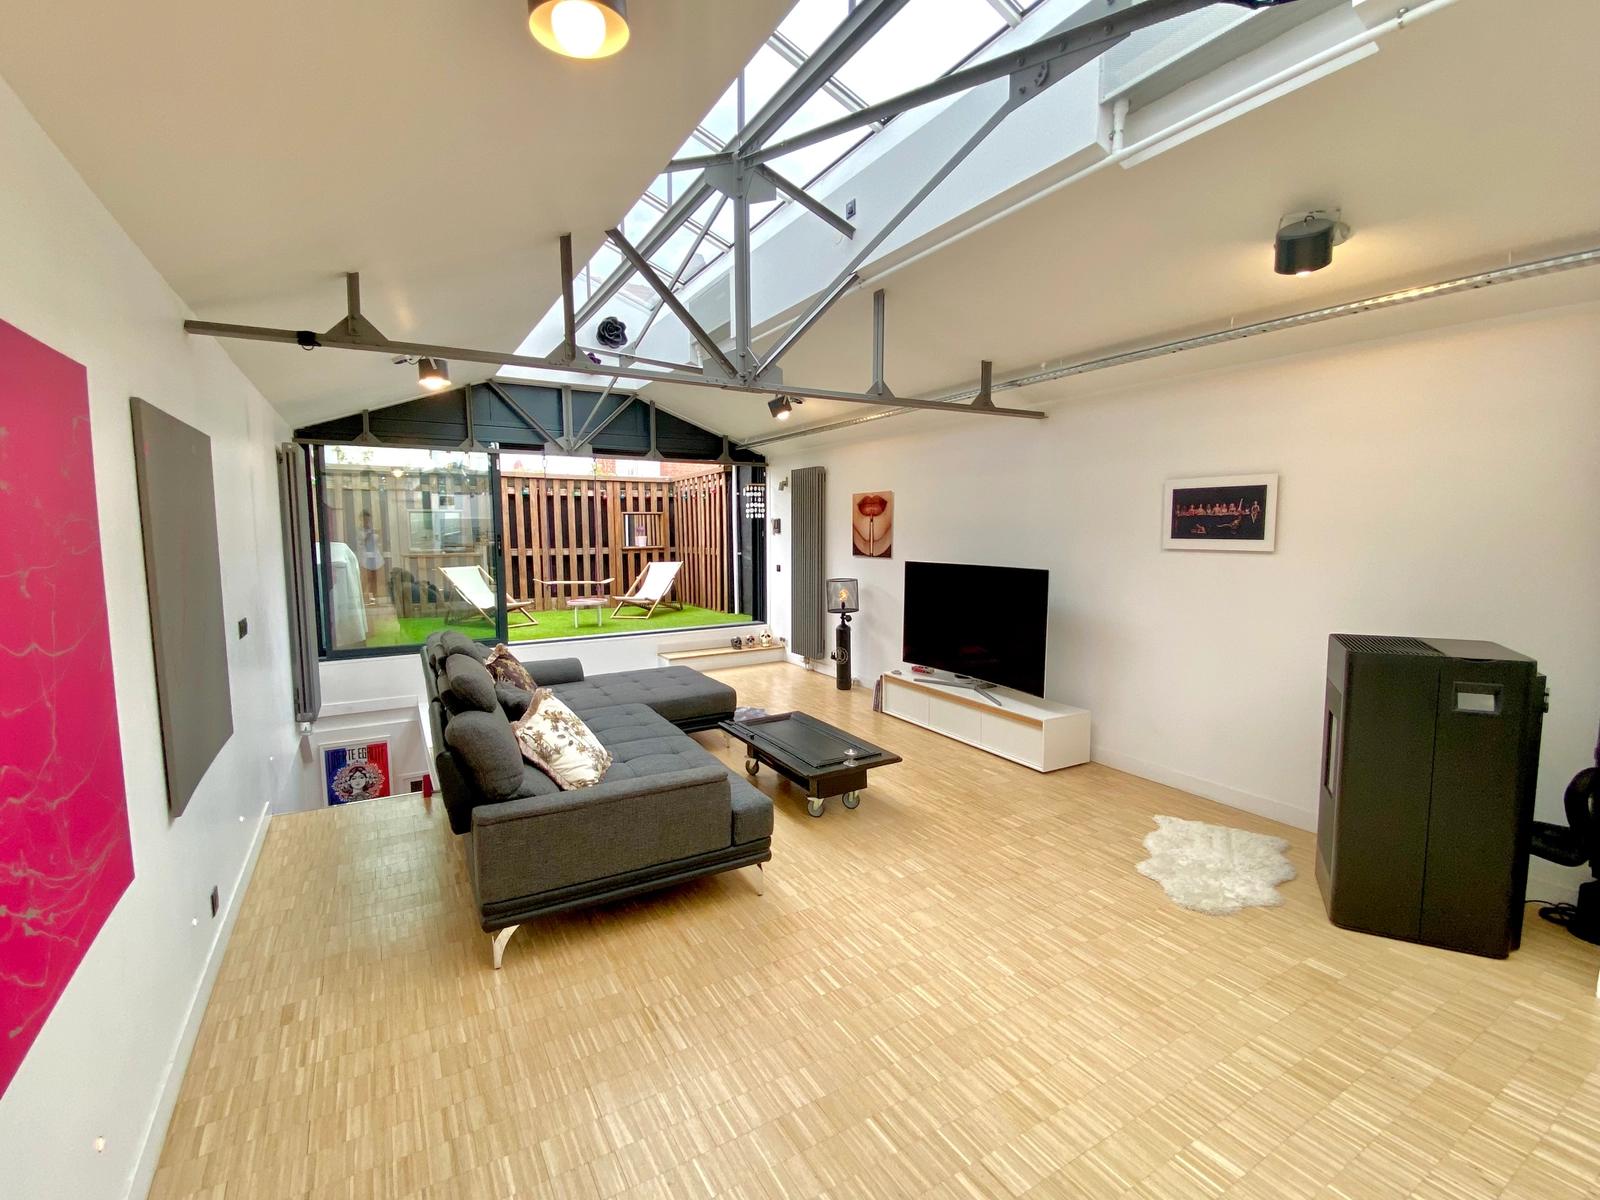 Living room in Loft house with glass roof - 1